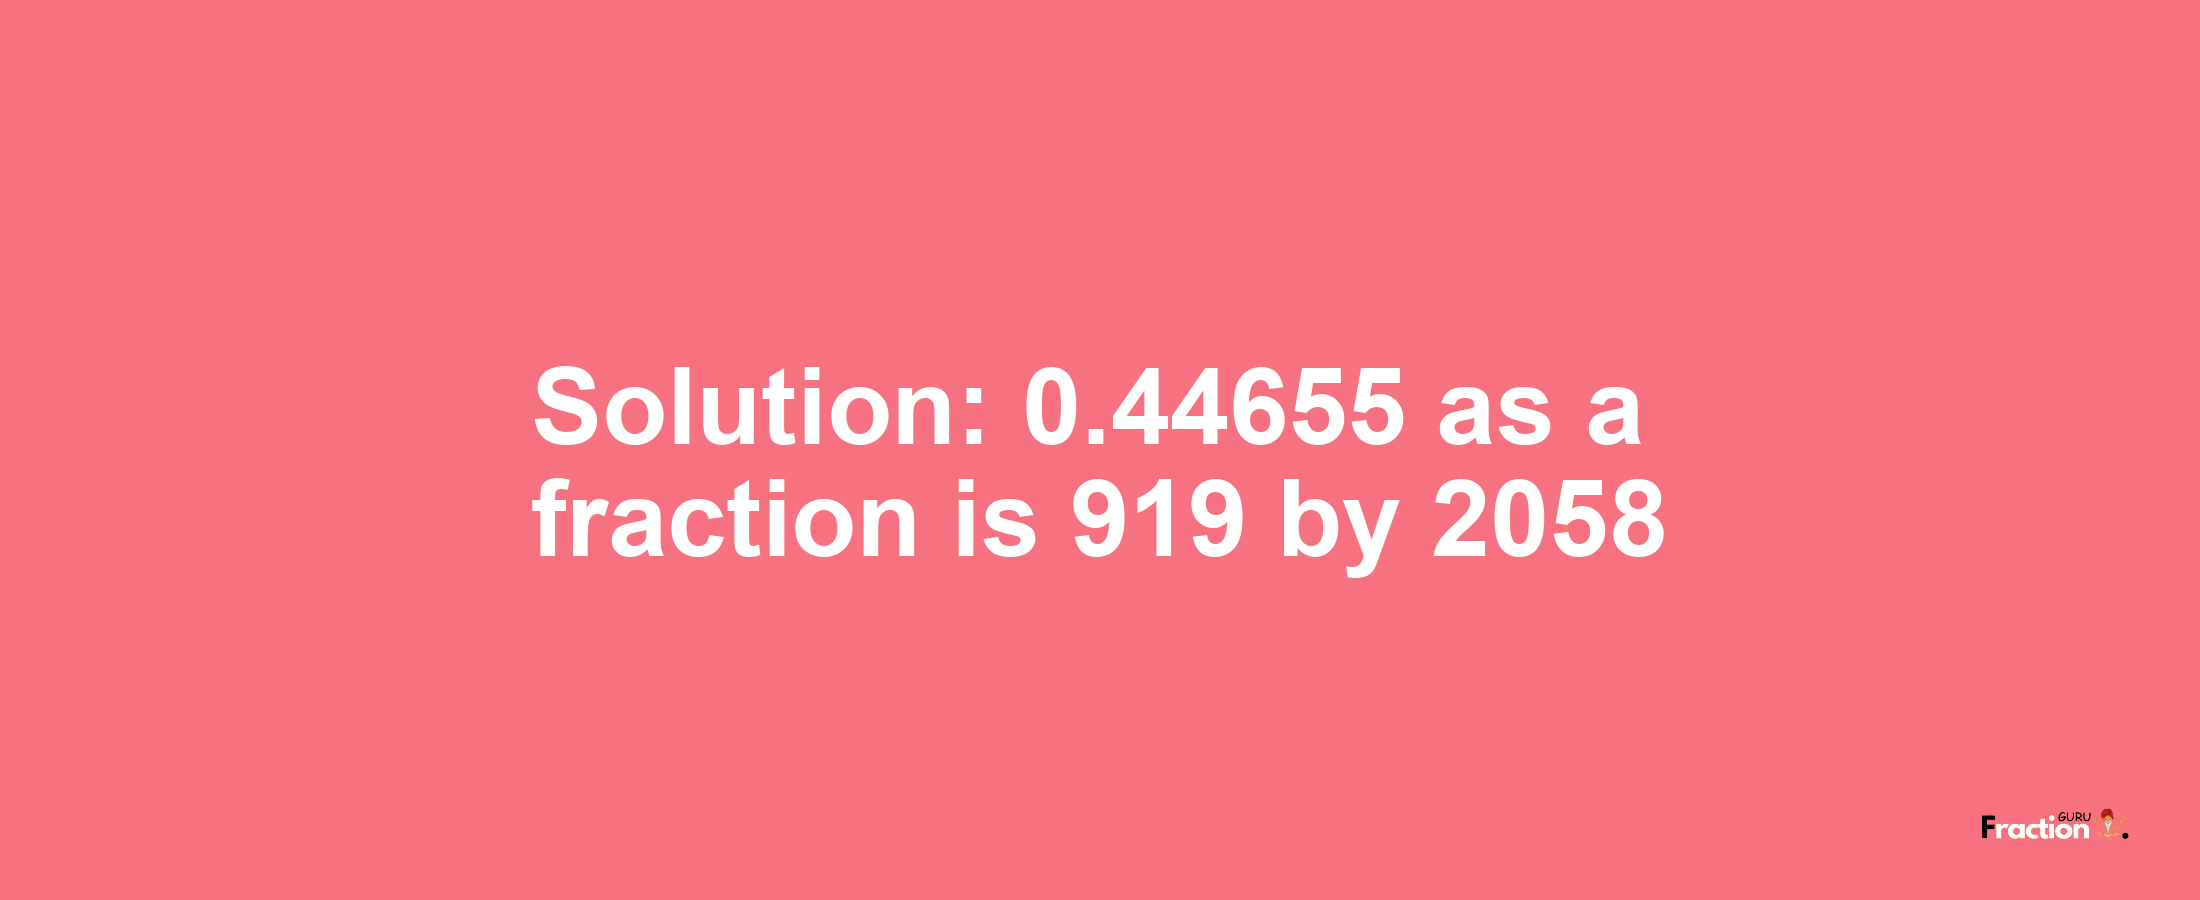 Solution:0.44655 as a fraction is 919/2058